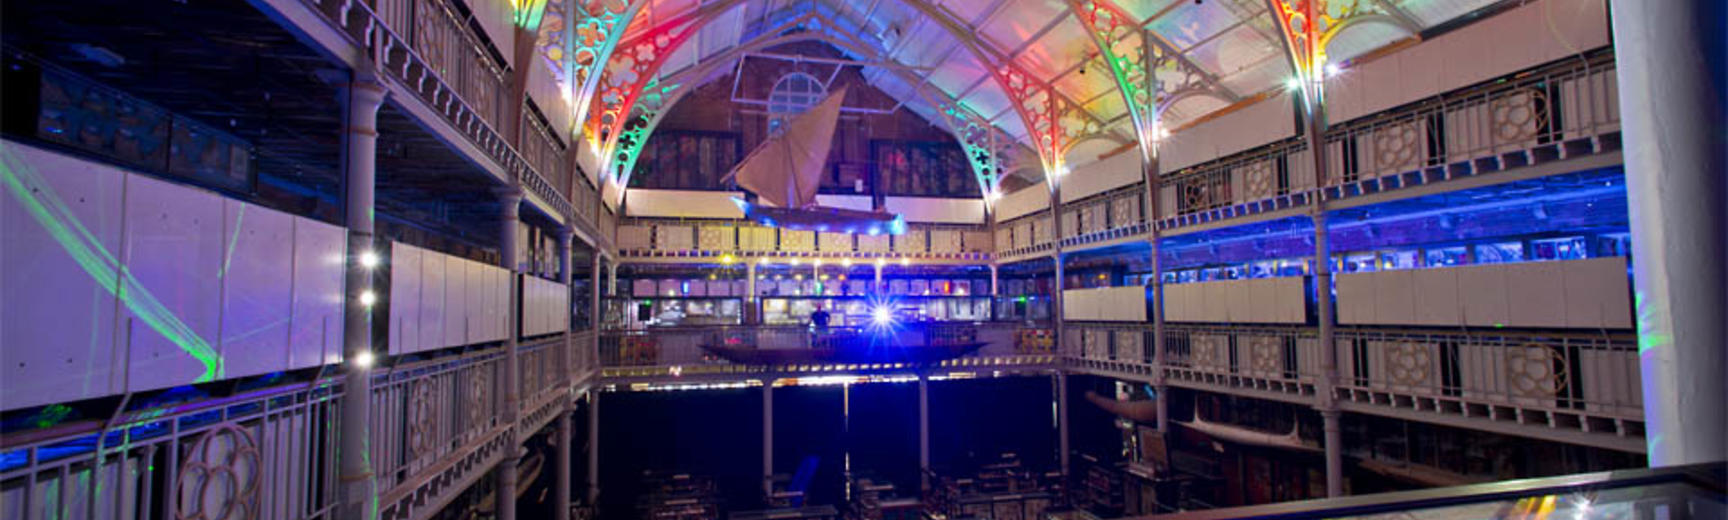 Overlooking museum main court showing colourfully lit ceiling and display cabinets